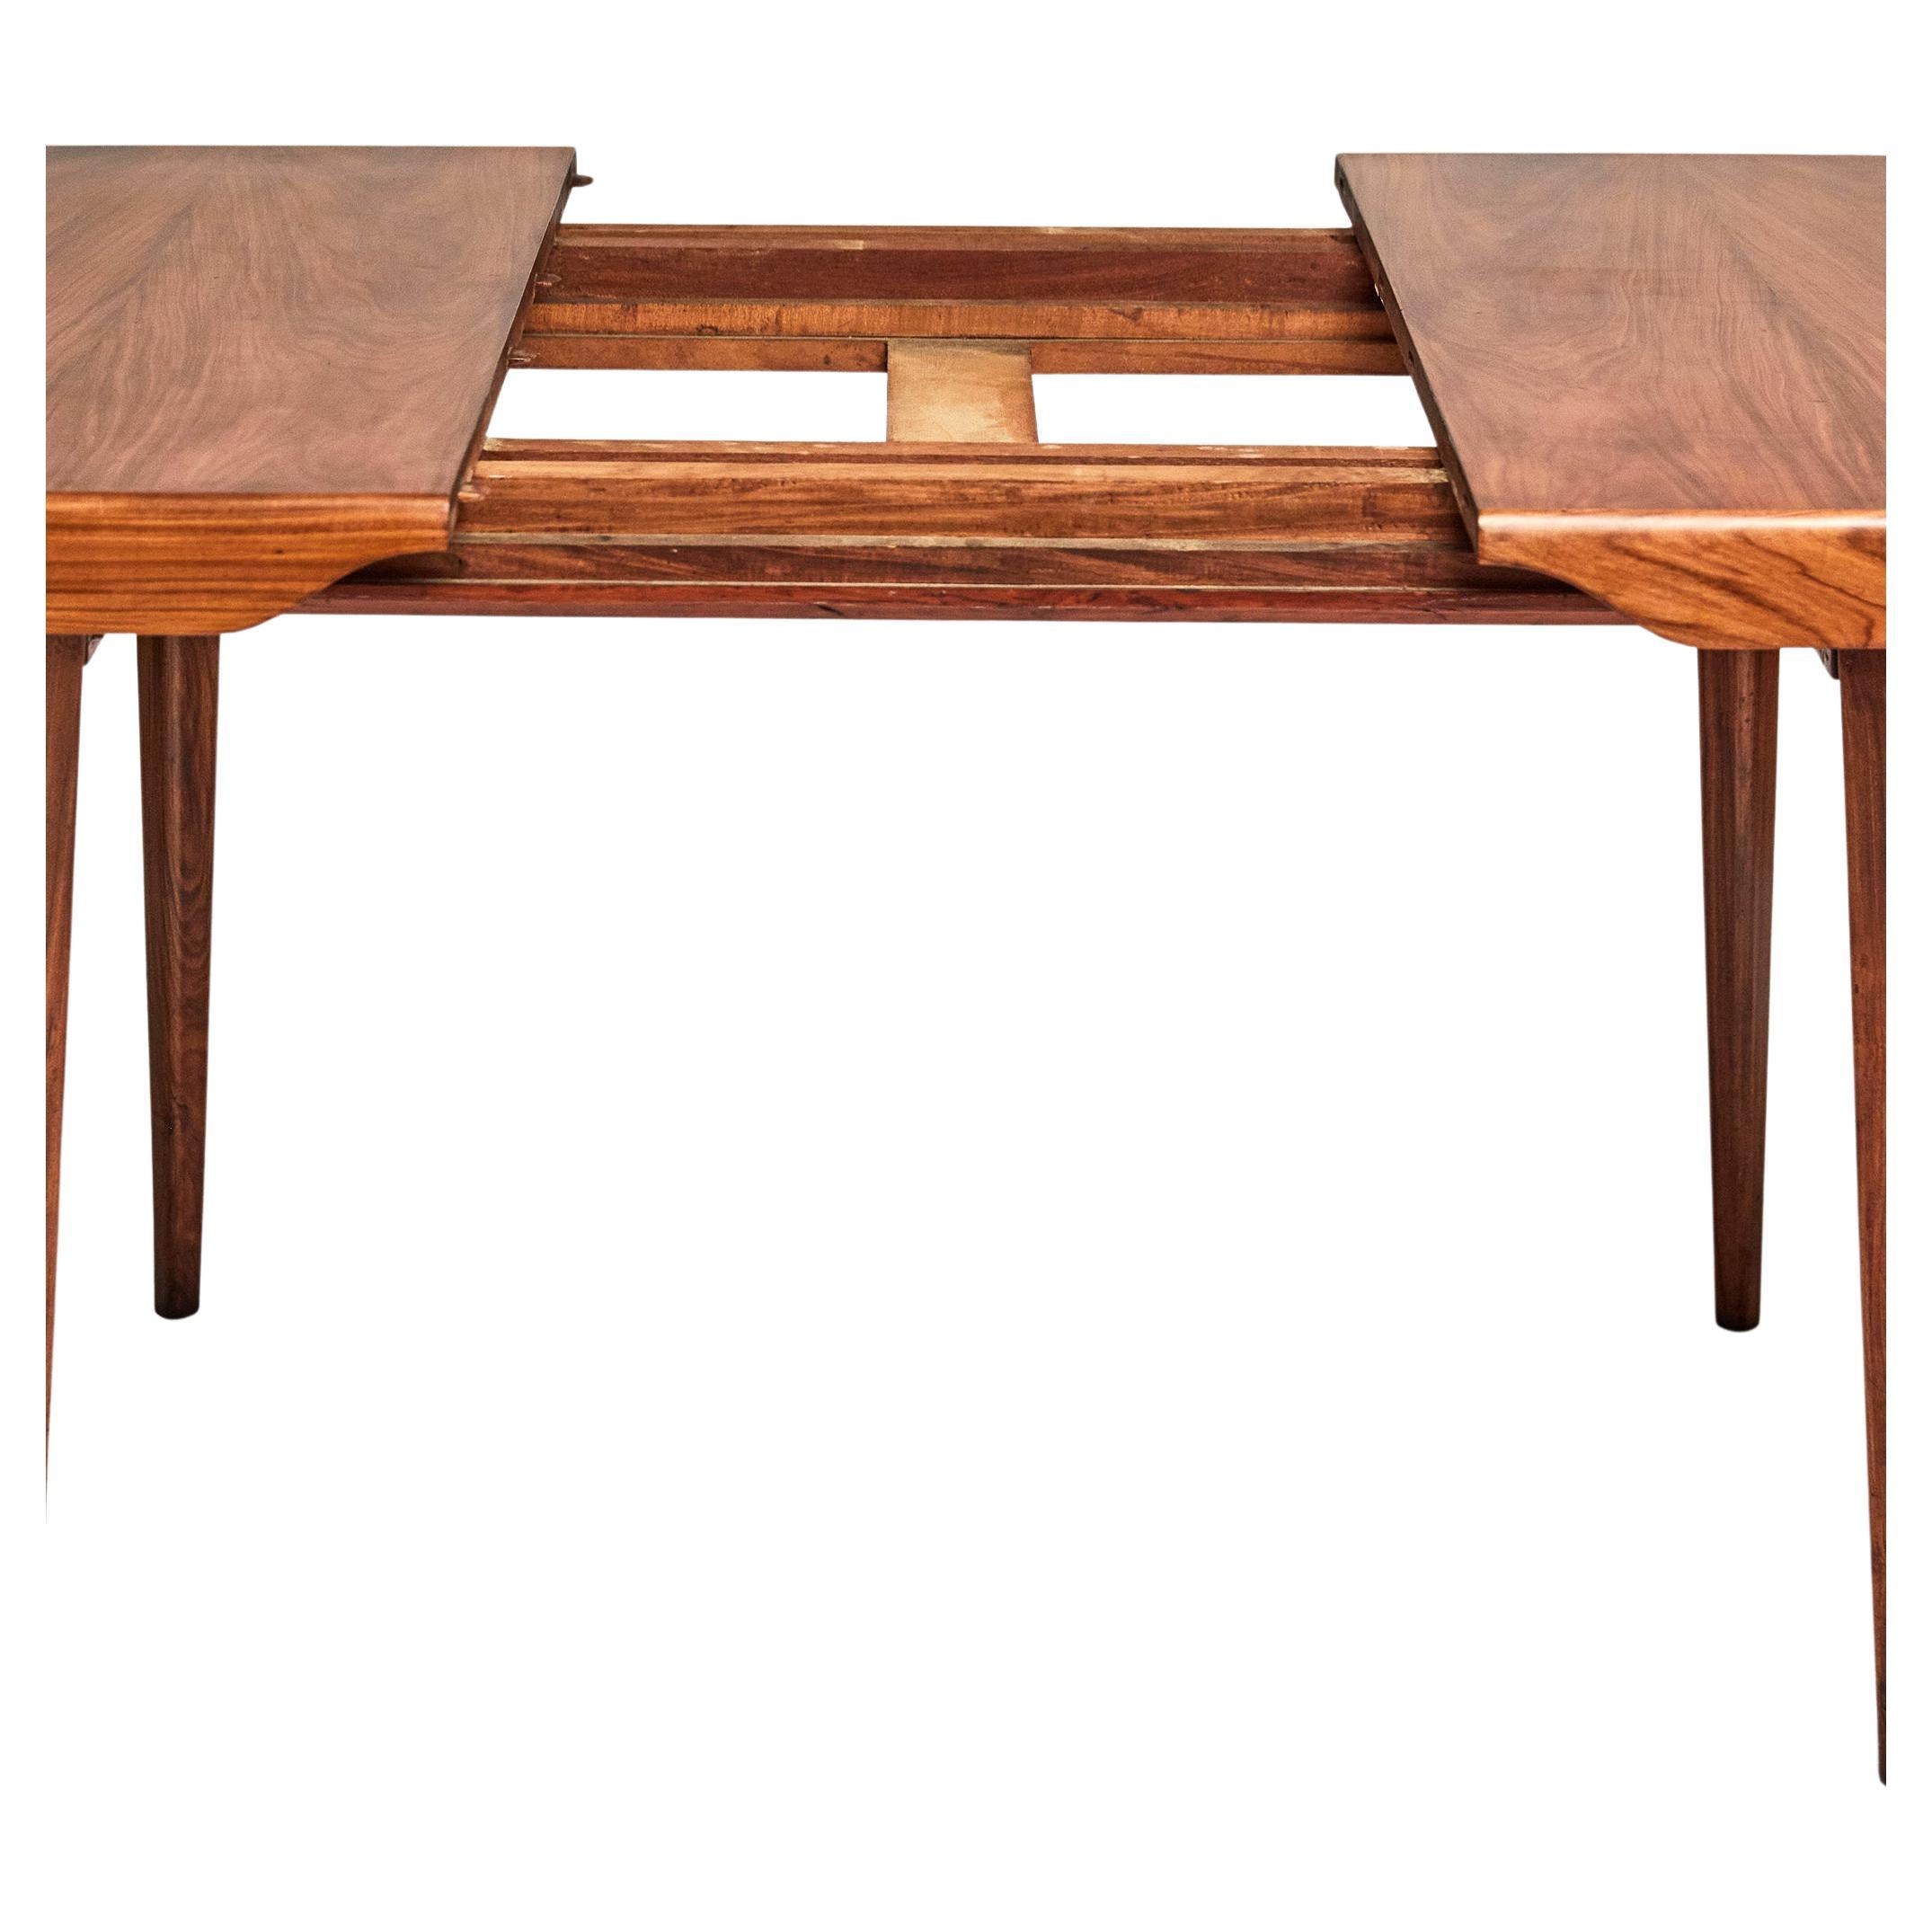 Hand-Carved Mid-Century Modern Dining Table in Caviuna Hardwood by Carlo Hauner 1950s Brazil For Sale